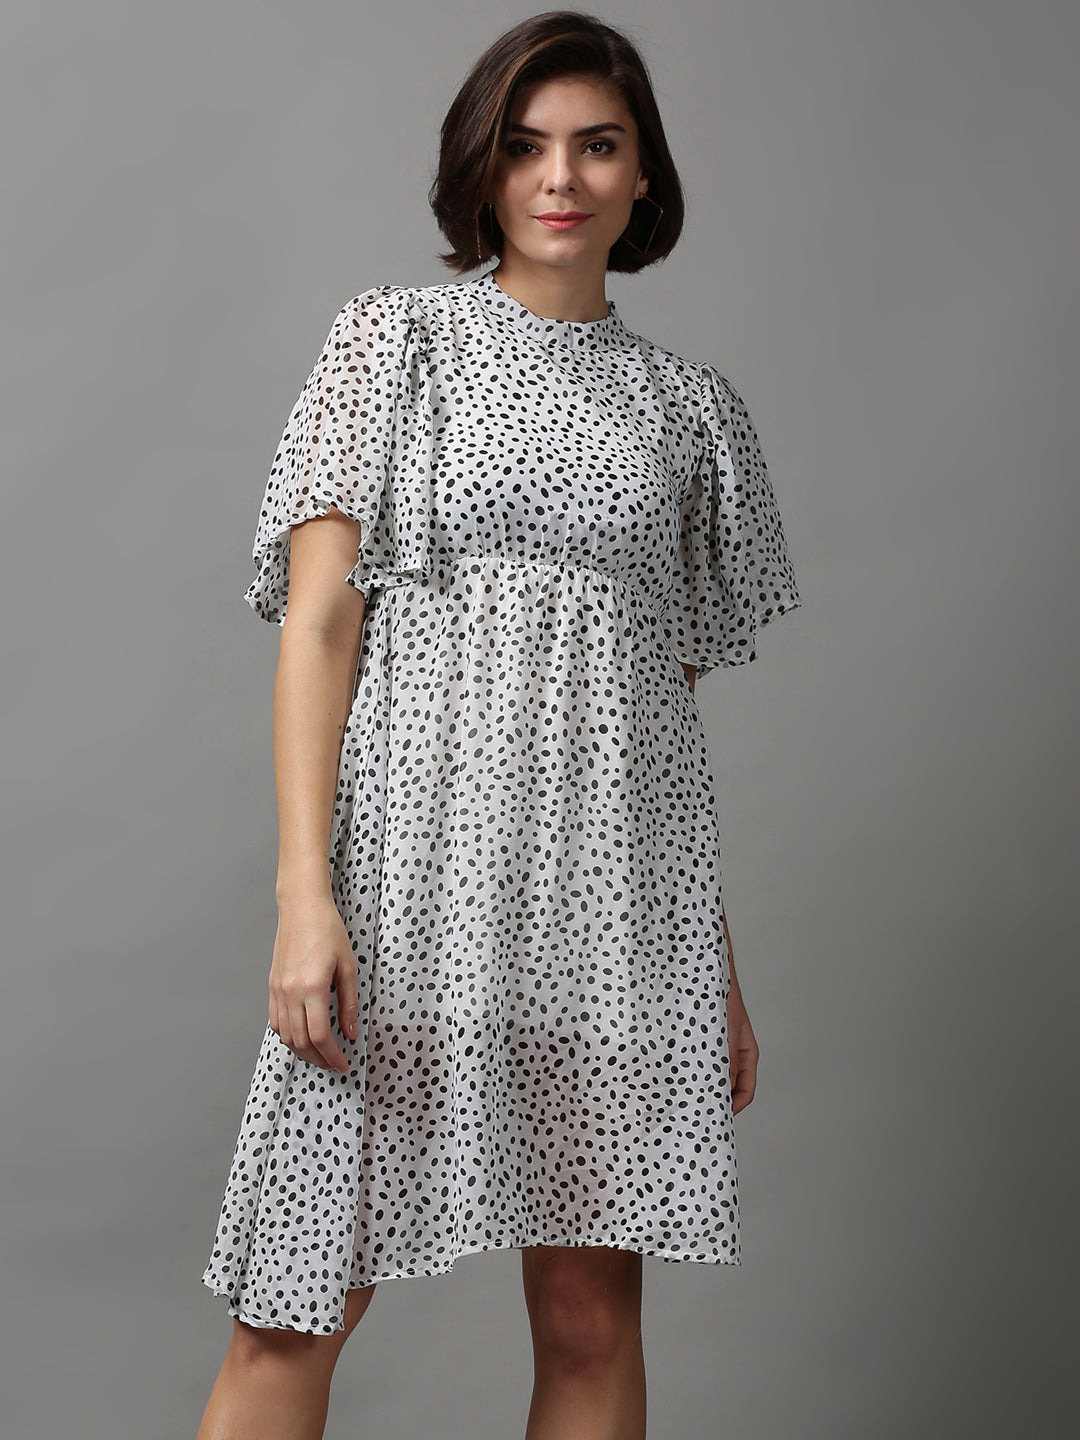 Women Printed Fit and Flare Off White Dress